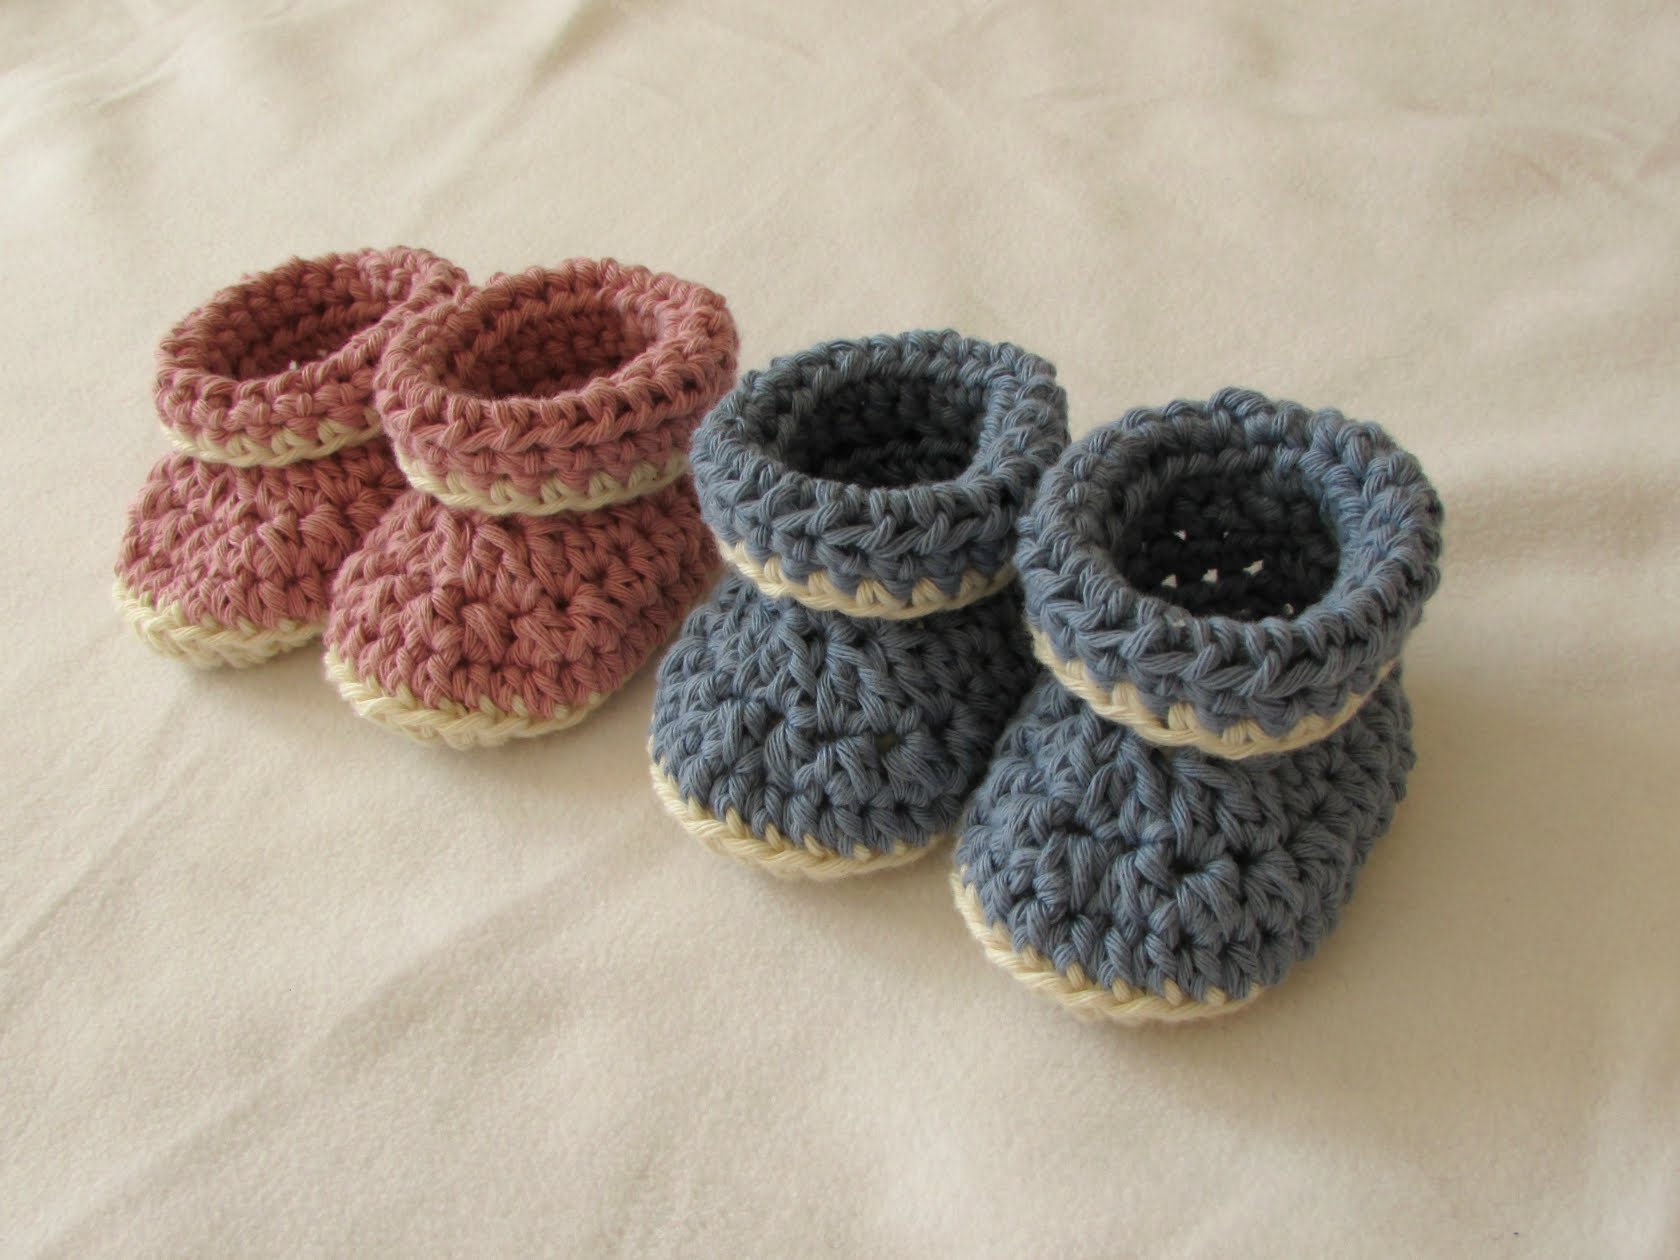 how to crochet baby booties very easy crochet cuffed baby booties tutorial - roll top baby shoes for palrpfs